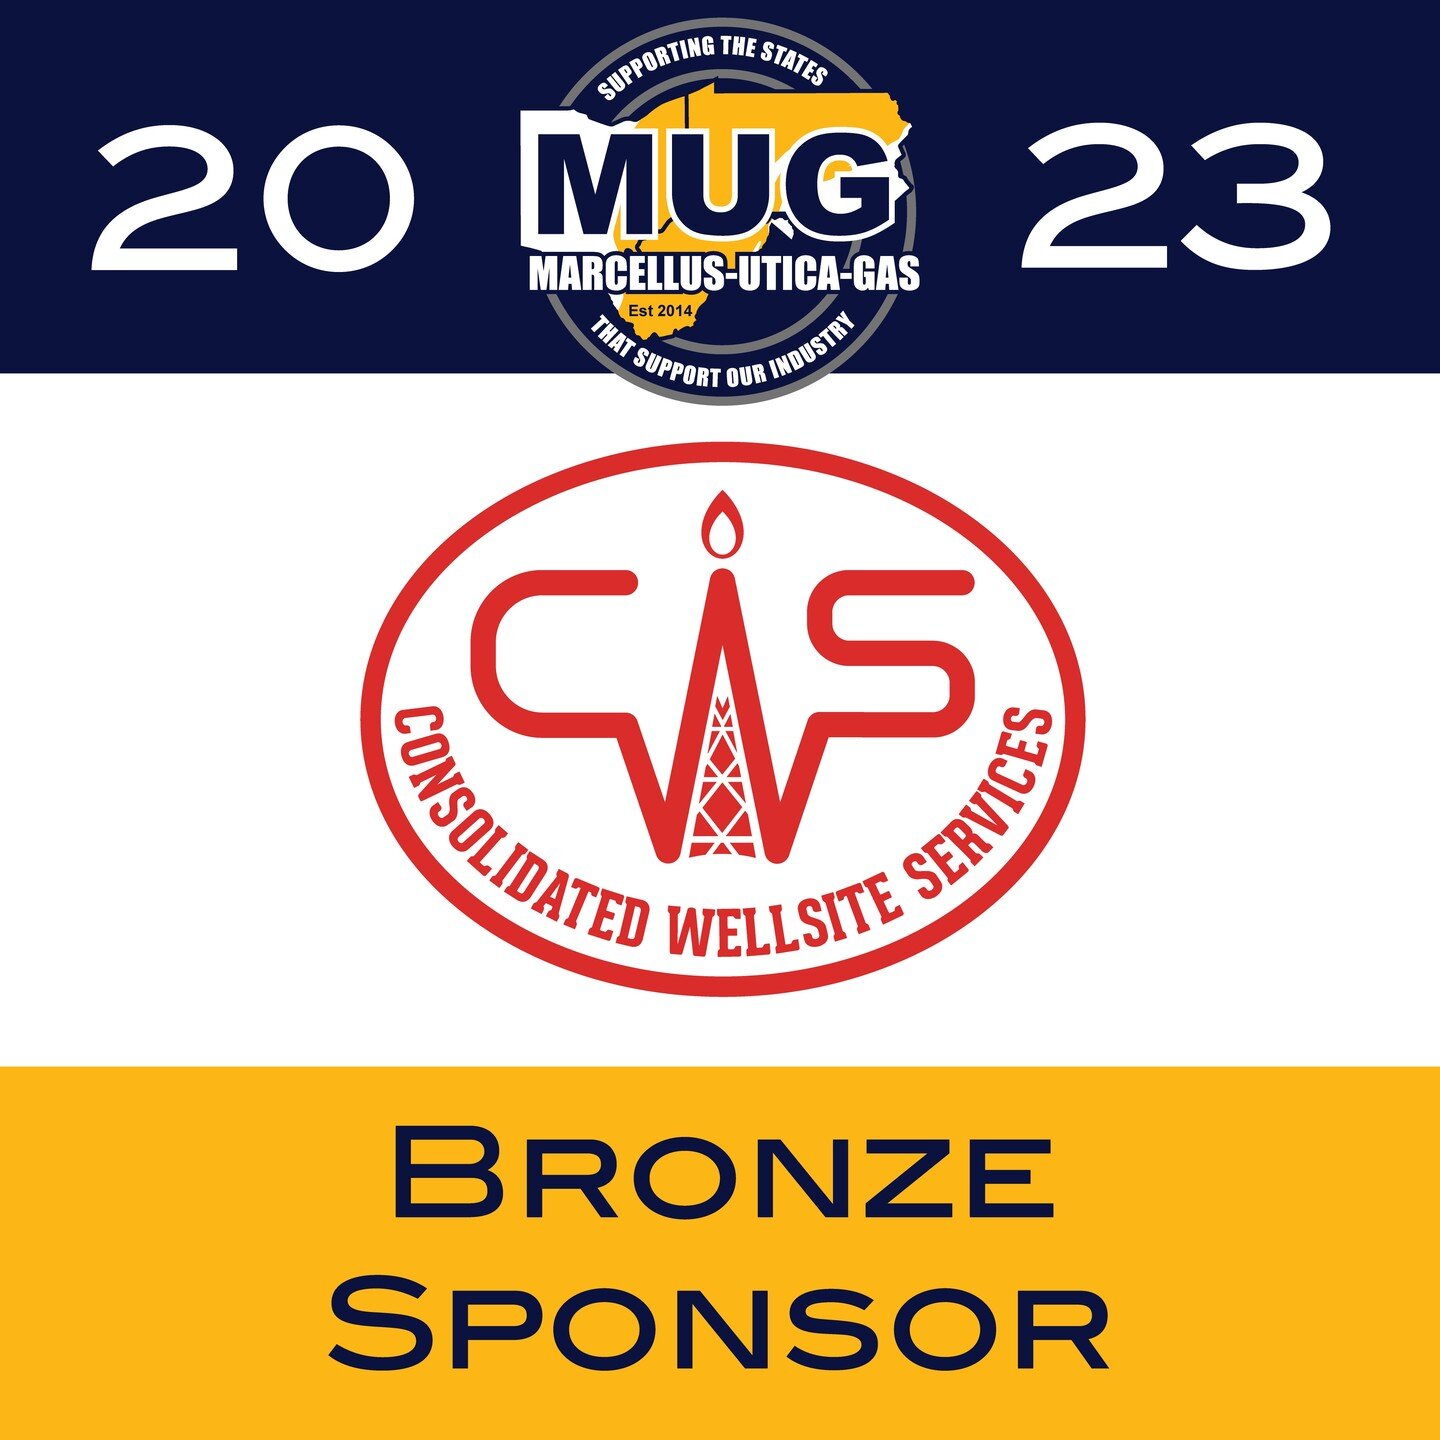 Thank you to our Bronze Sponsor, Consolidated Wellsite Services, for your support in 2023!